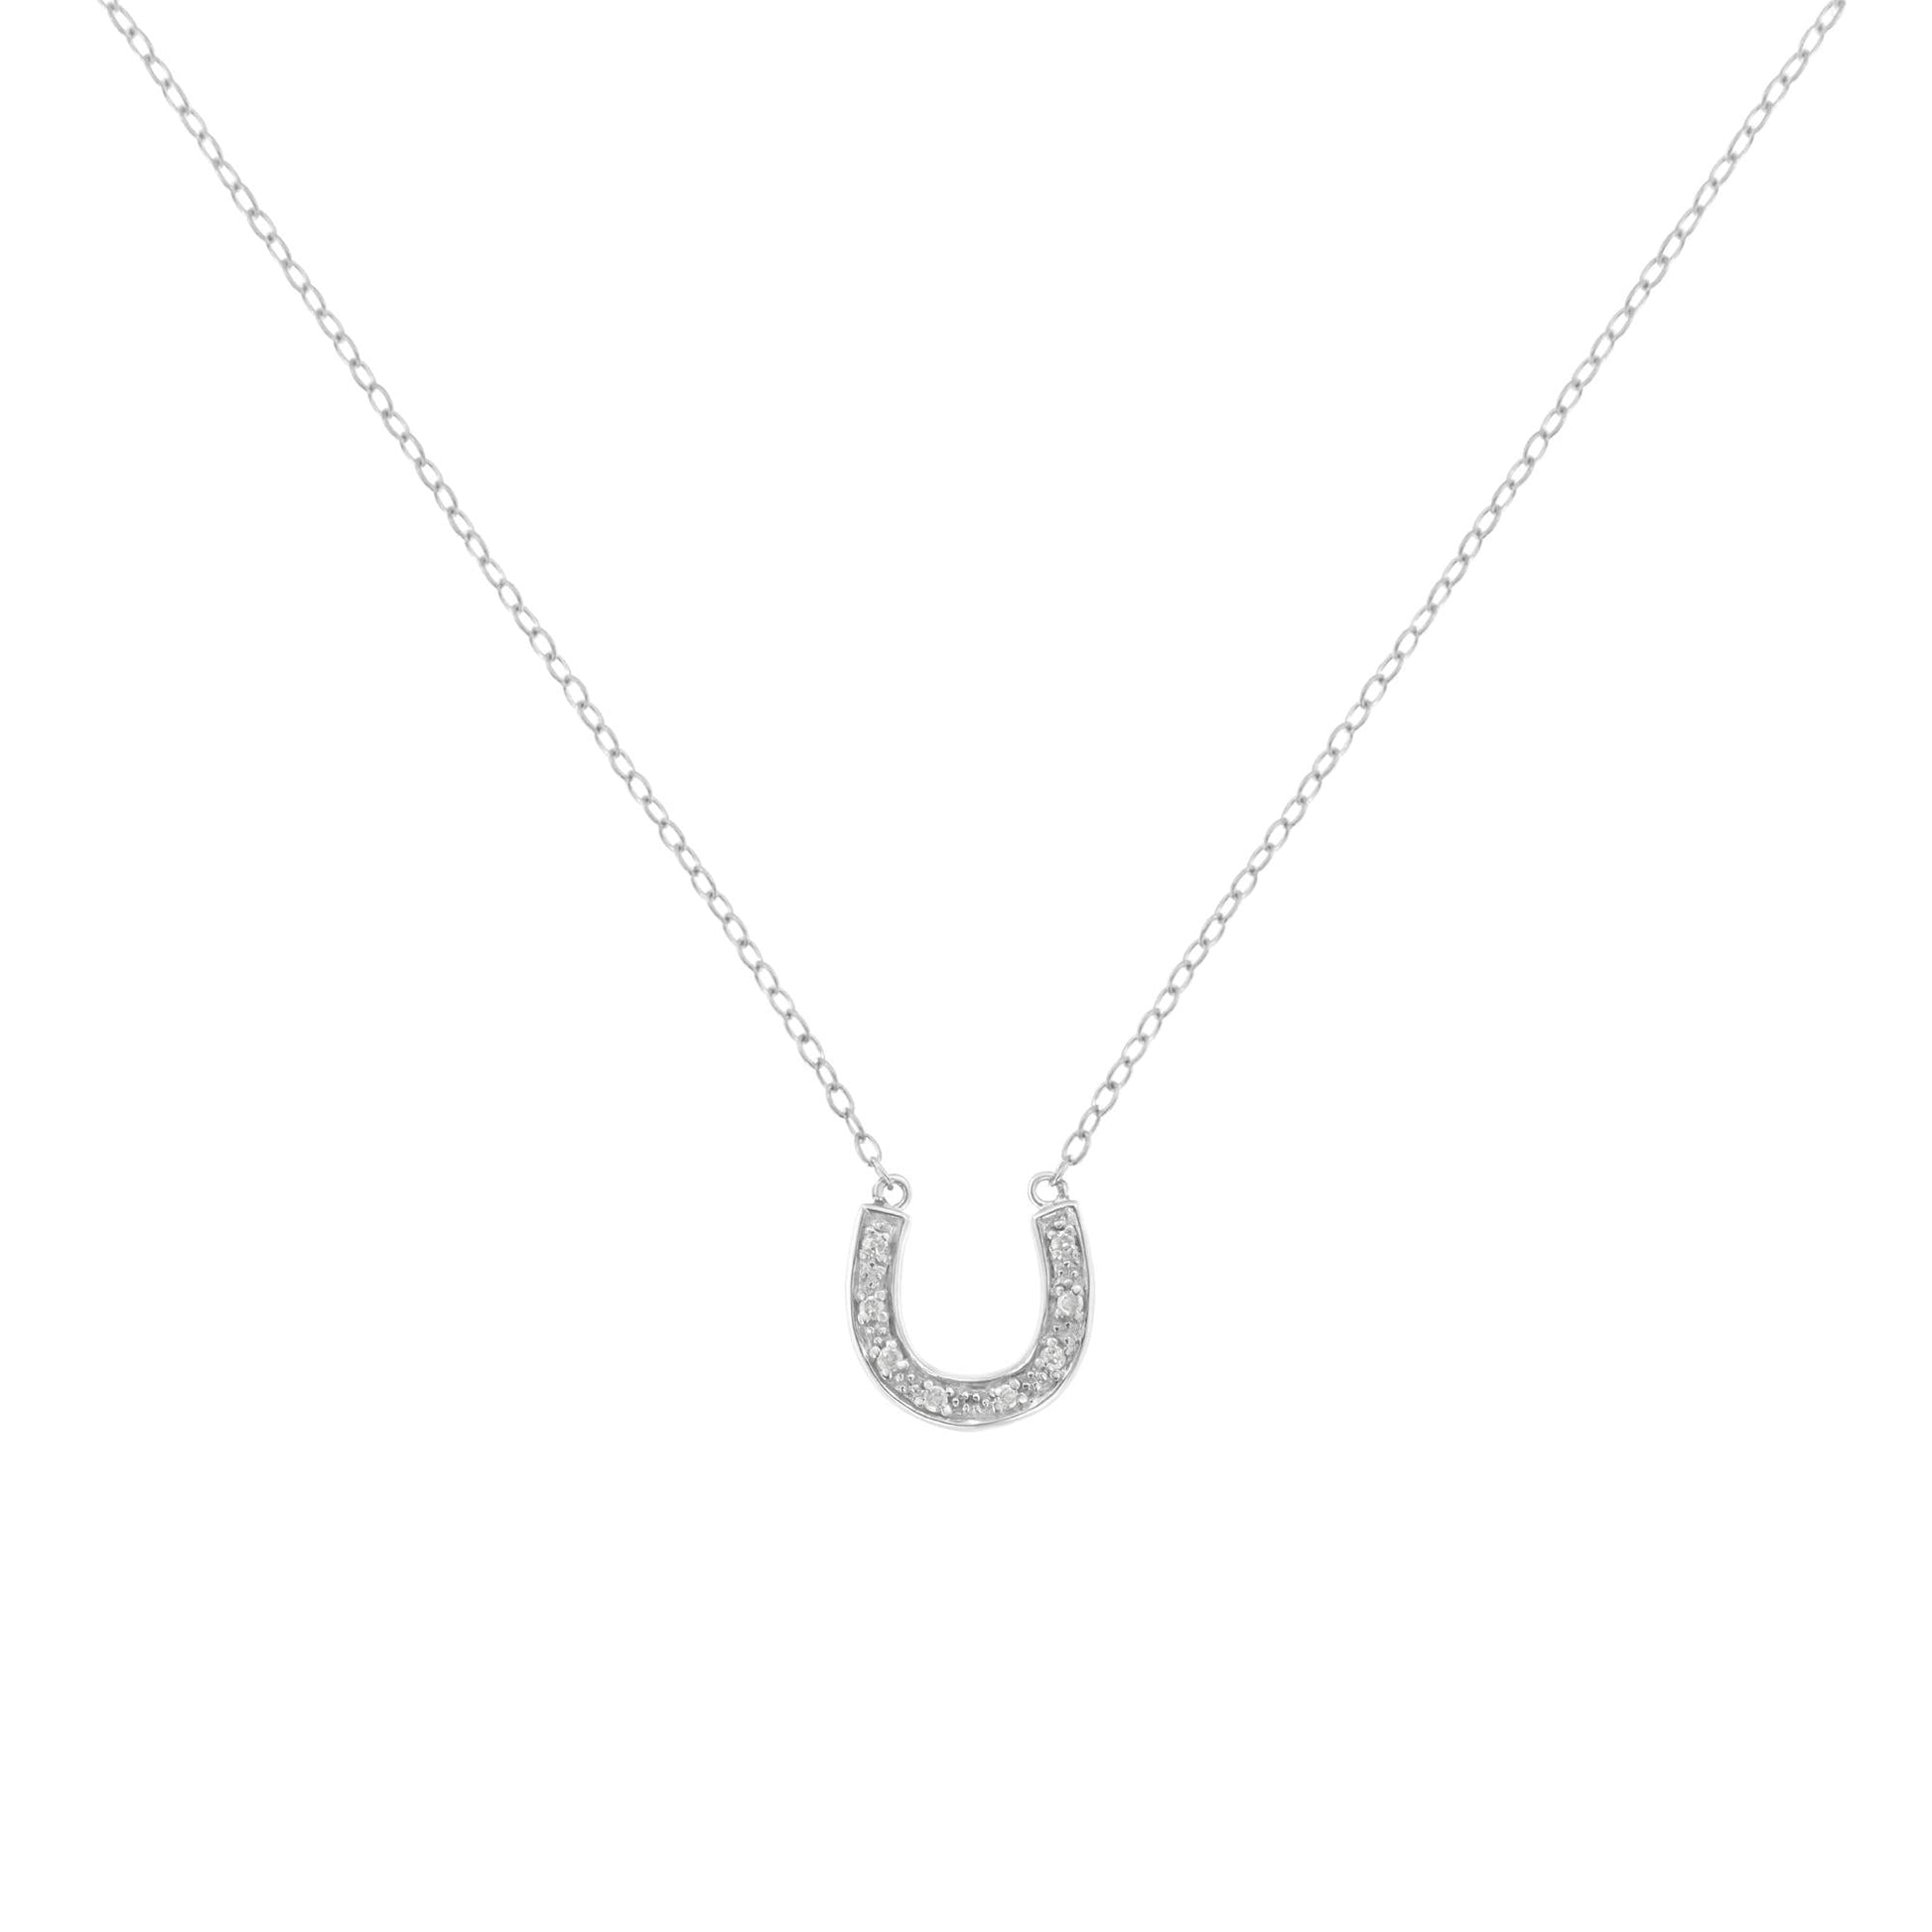 .925 Sterling Silver Horseshoe Pendant Necklace with Diamond Accents - Desire & Hope